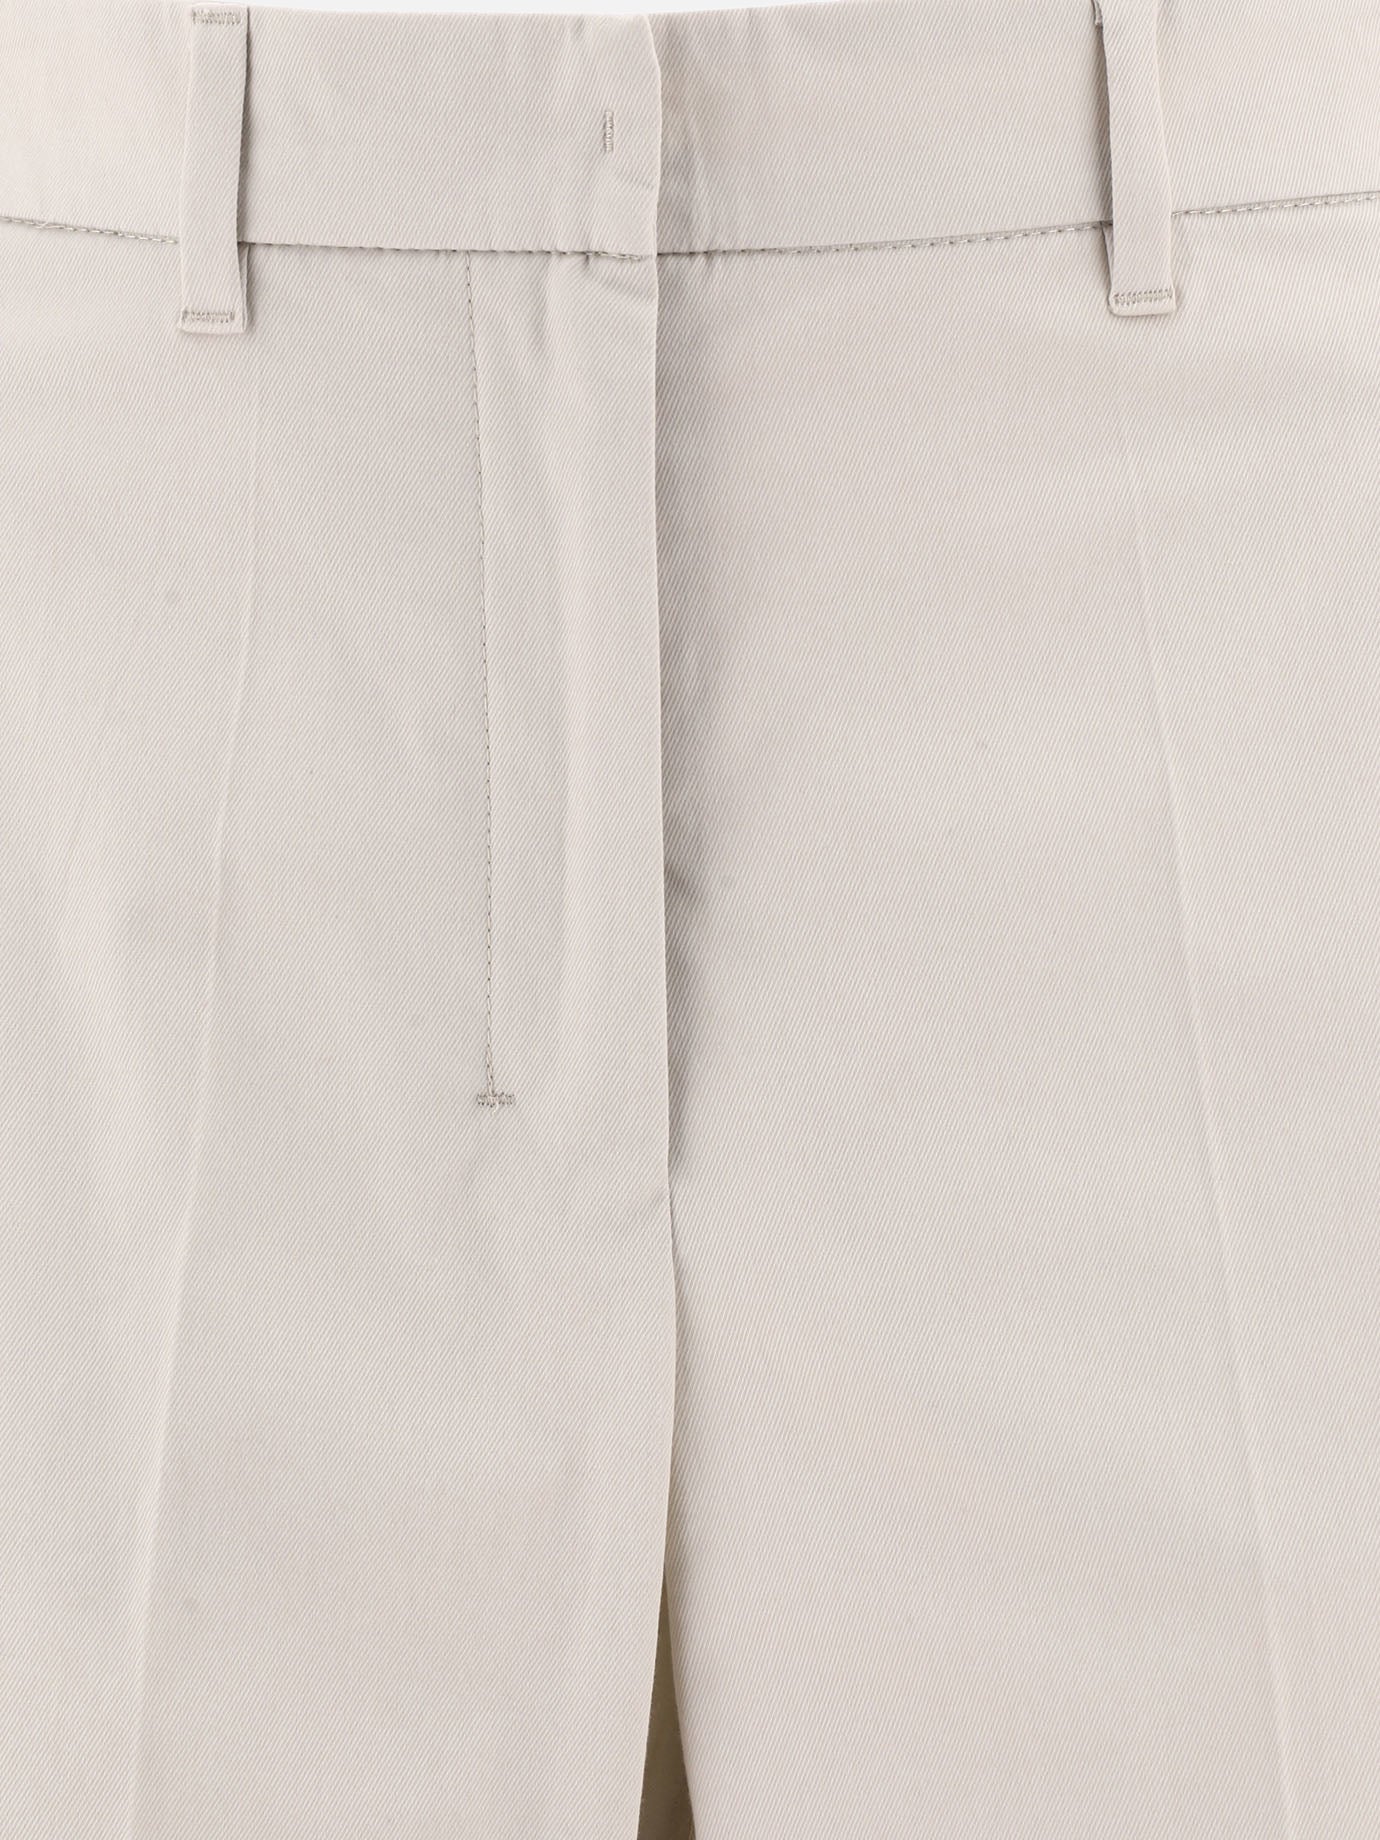 "Pina" trousers